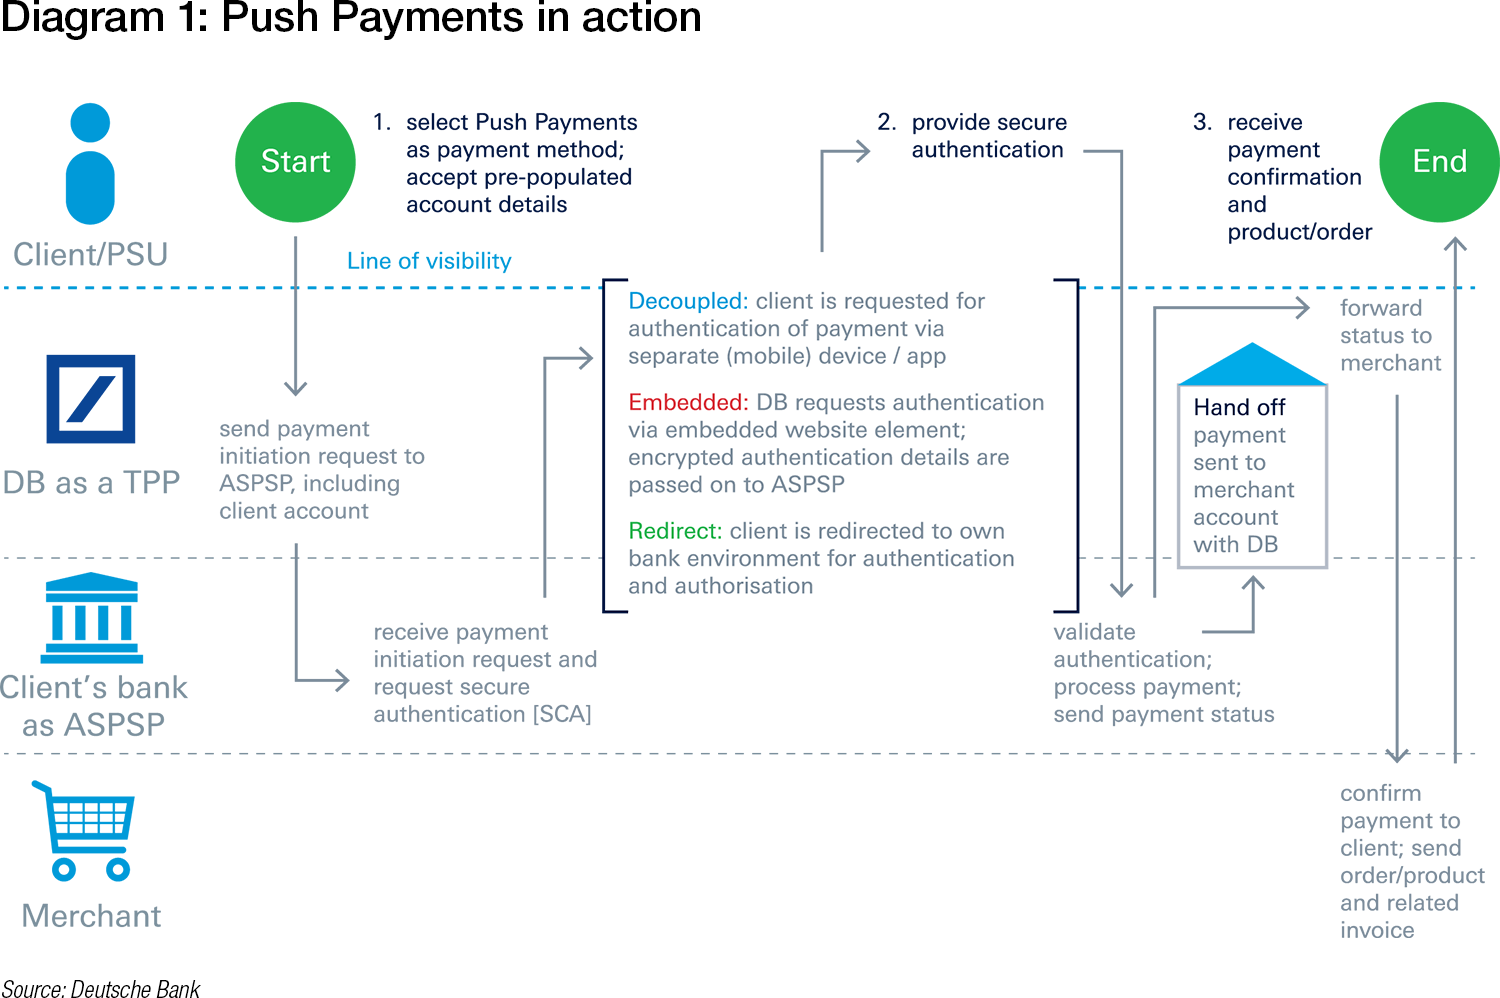 Diagam 1: Push payments in action